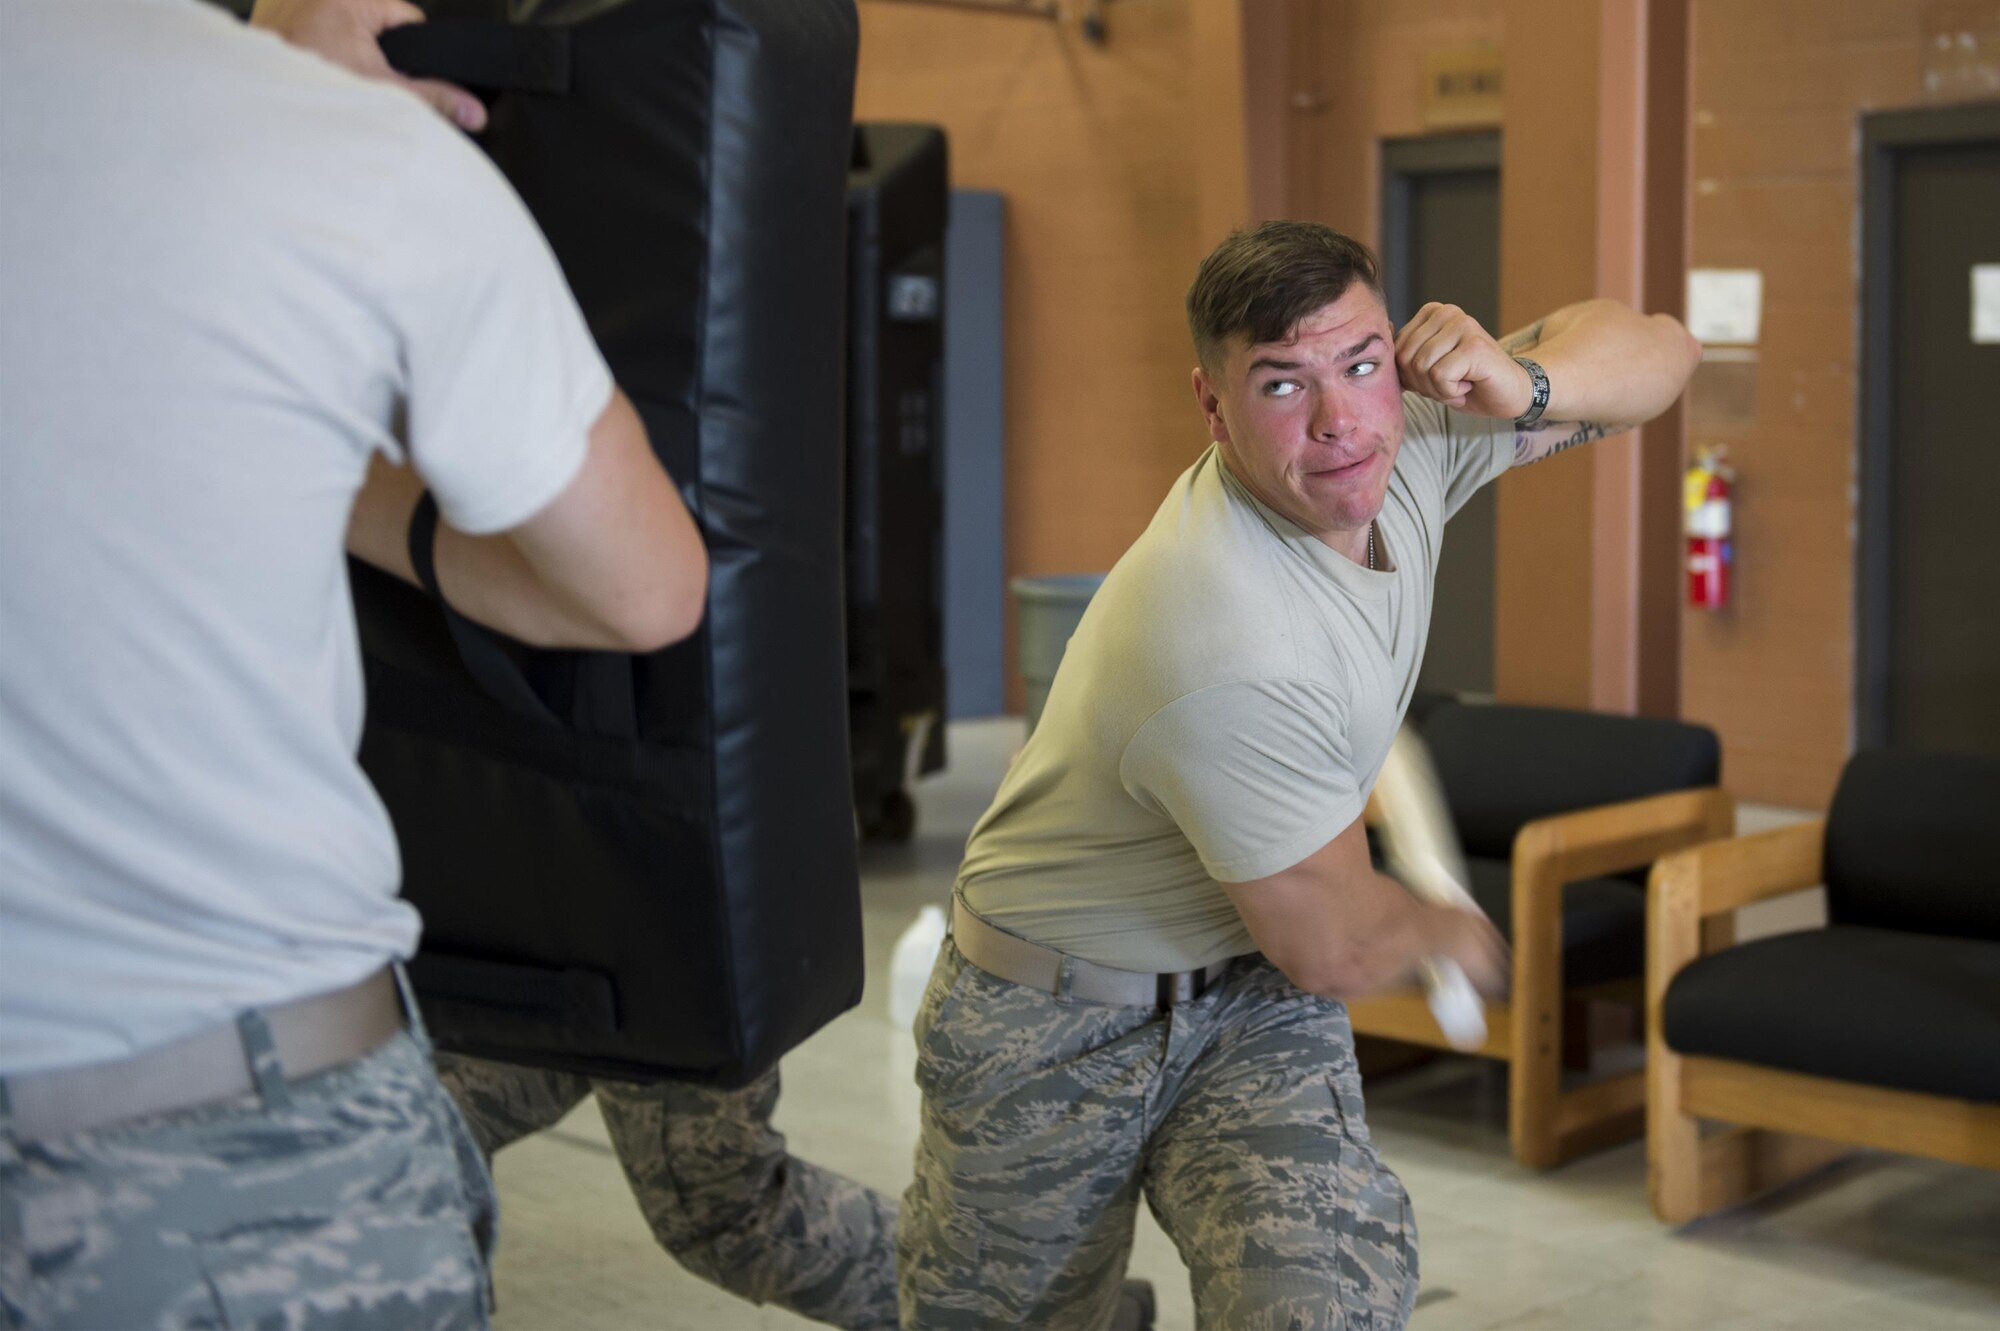 Airman 1st Class Nicholas O'Brien, 105th Base Defense Squadron security forces member, strikes a bag during baton training, Sept. 28, 2016, at Moody Air Force Base, Ga. The 820th Base Defense Group trained with the 105th BDS for more than a month before leaving for their deployments to Southwest Asia. (U.S. Air Force photo by Tech. Sgt. Zachary Wolf)